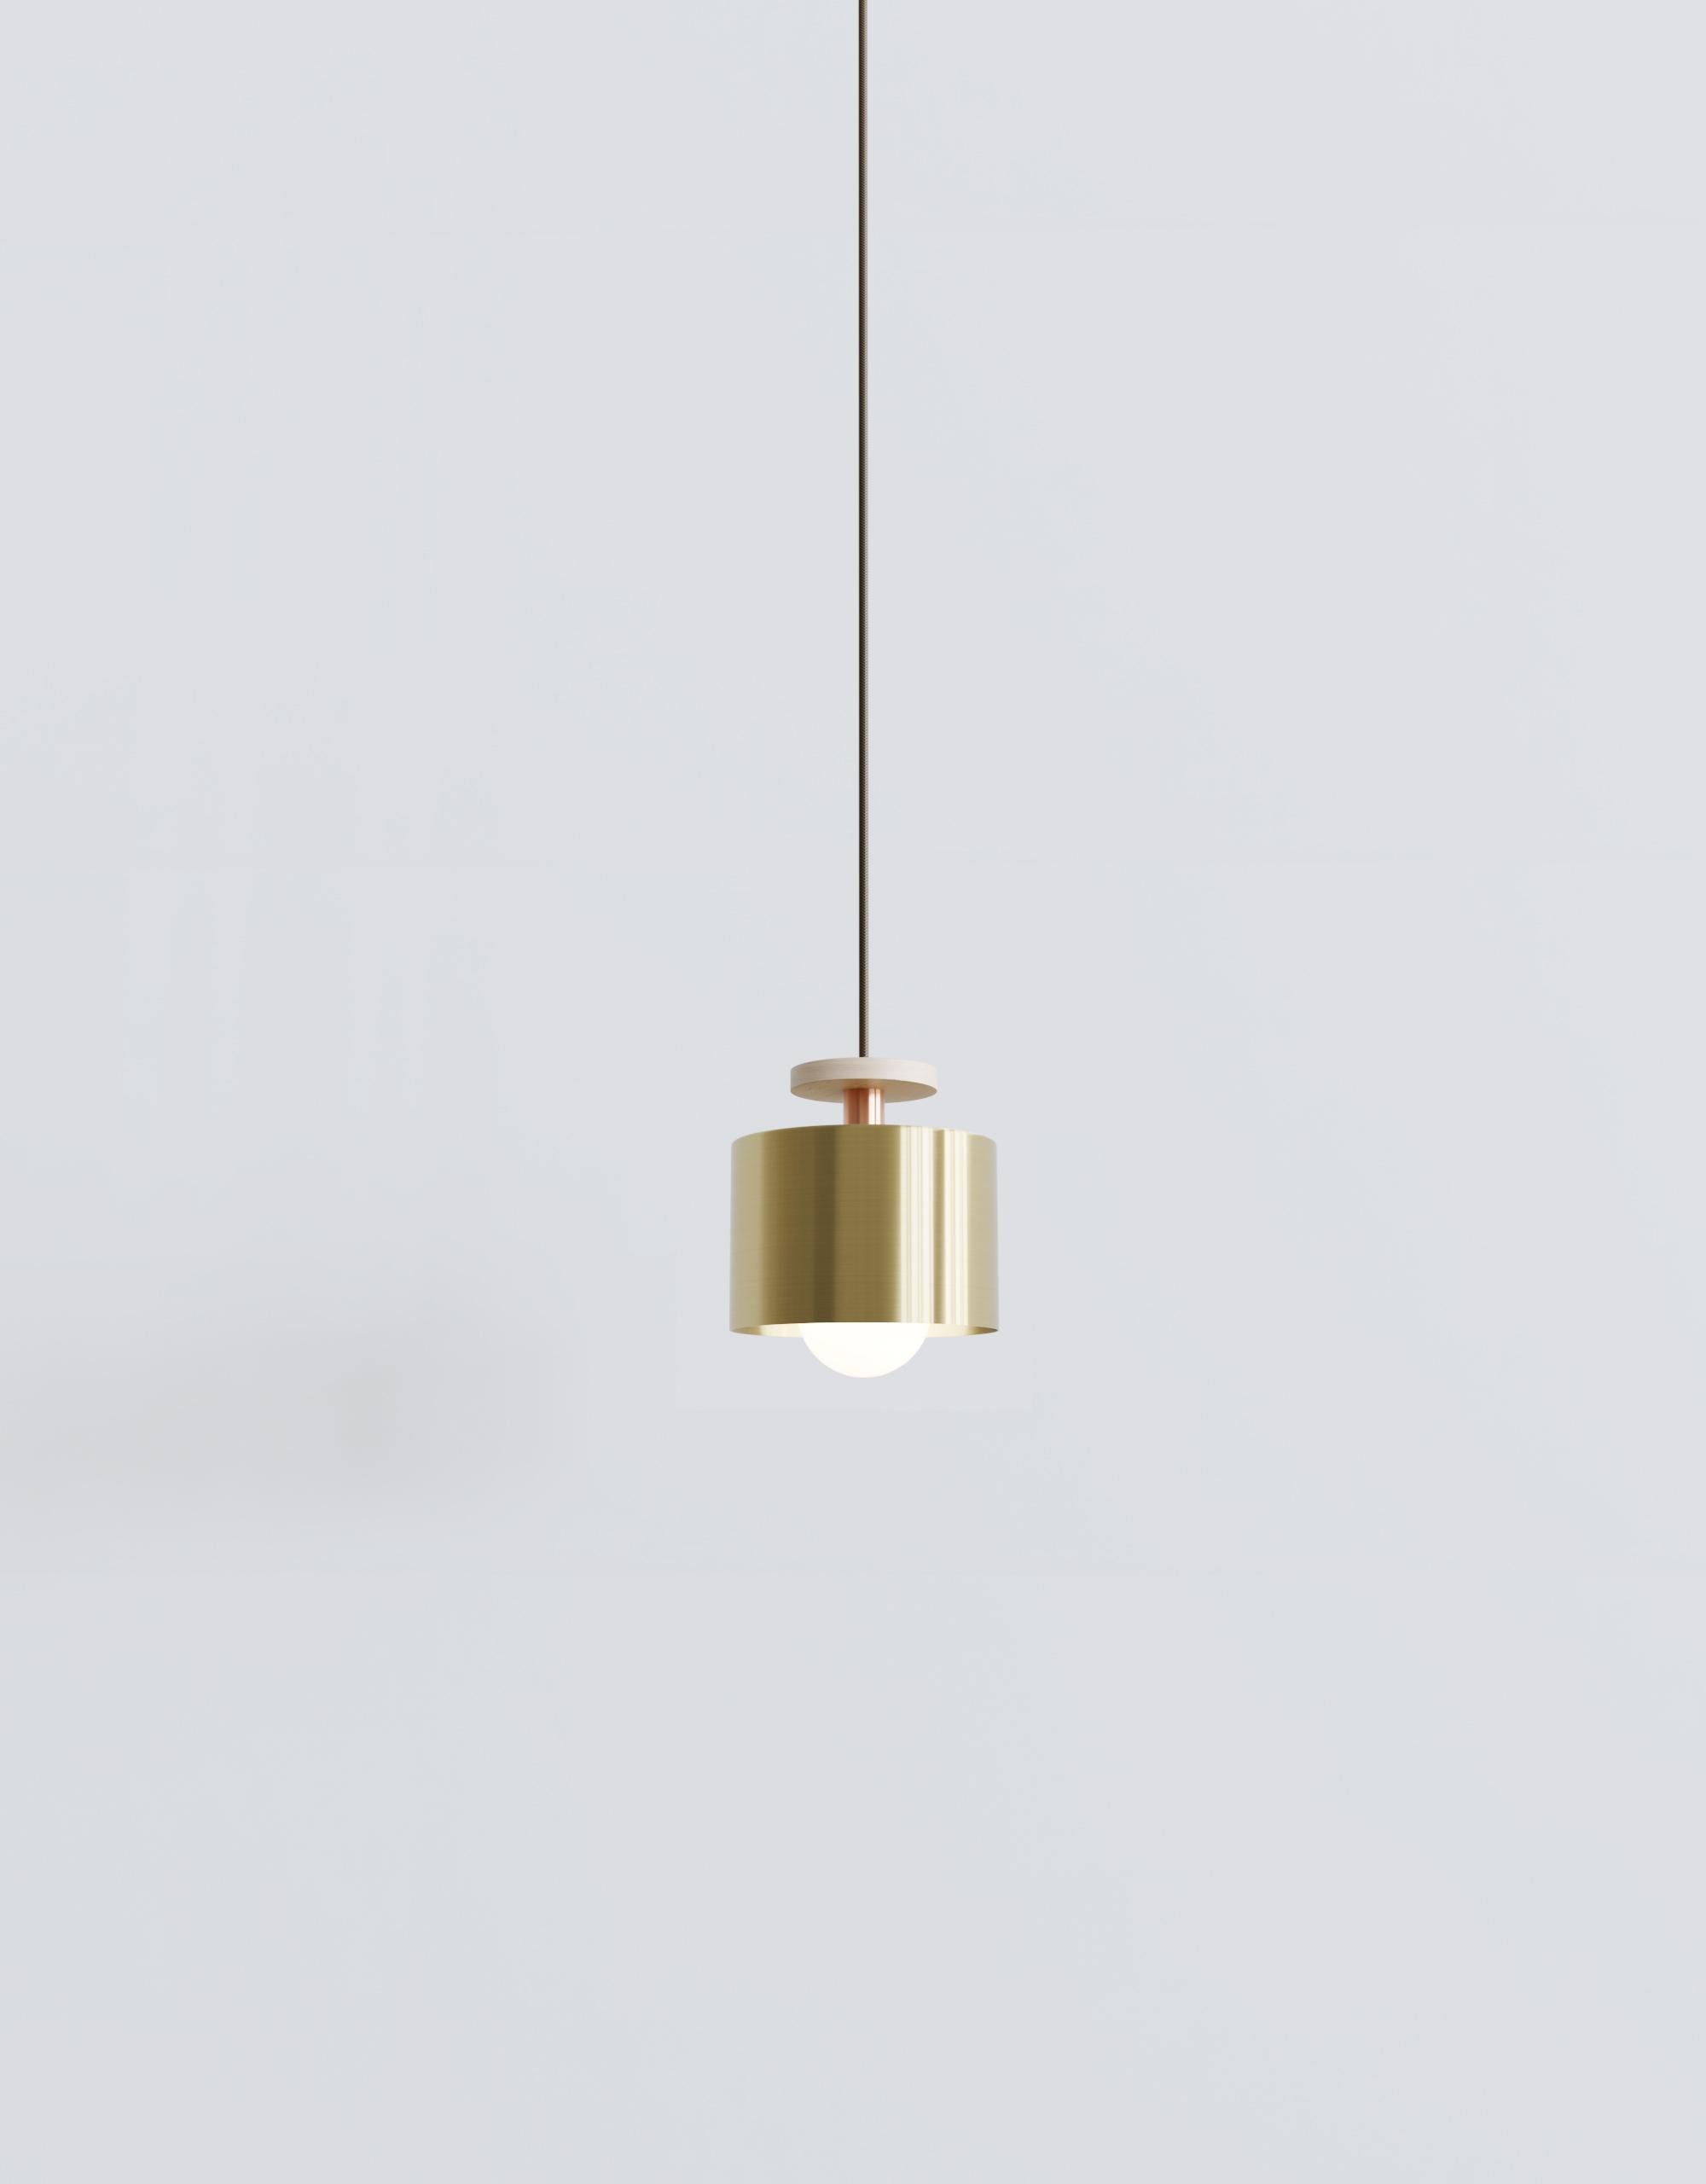 As if designing jewelry, spun was created considered how each lighting component could complement the other to create tidy elegant compositions. Spun features a polished brass, matte black, or frosted glass shade, which encases an exposed globe